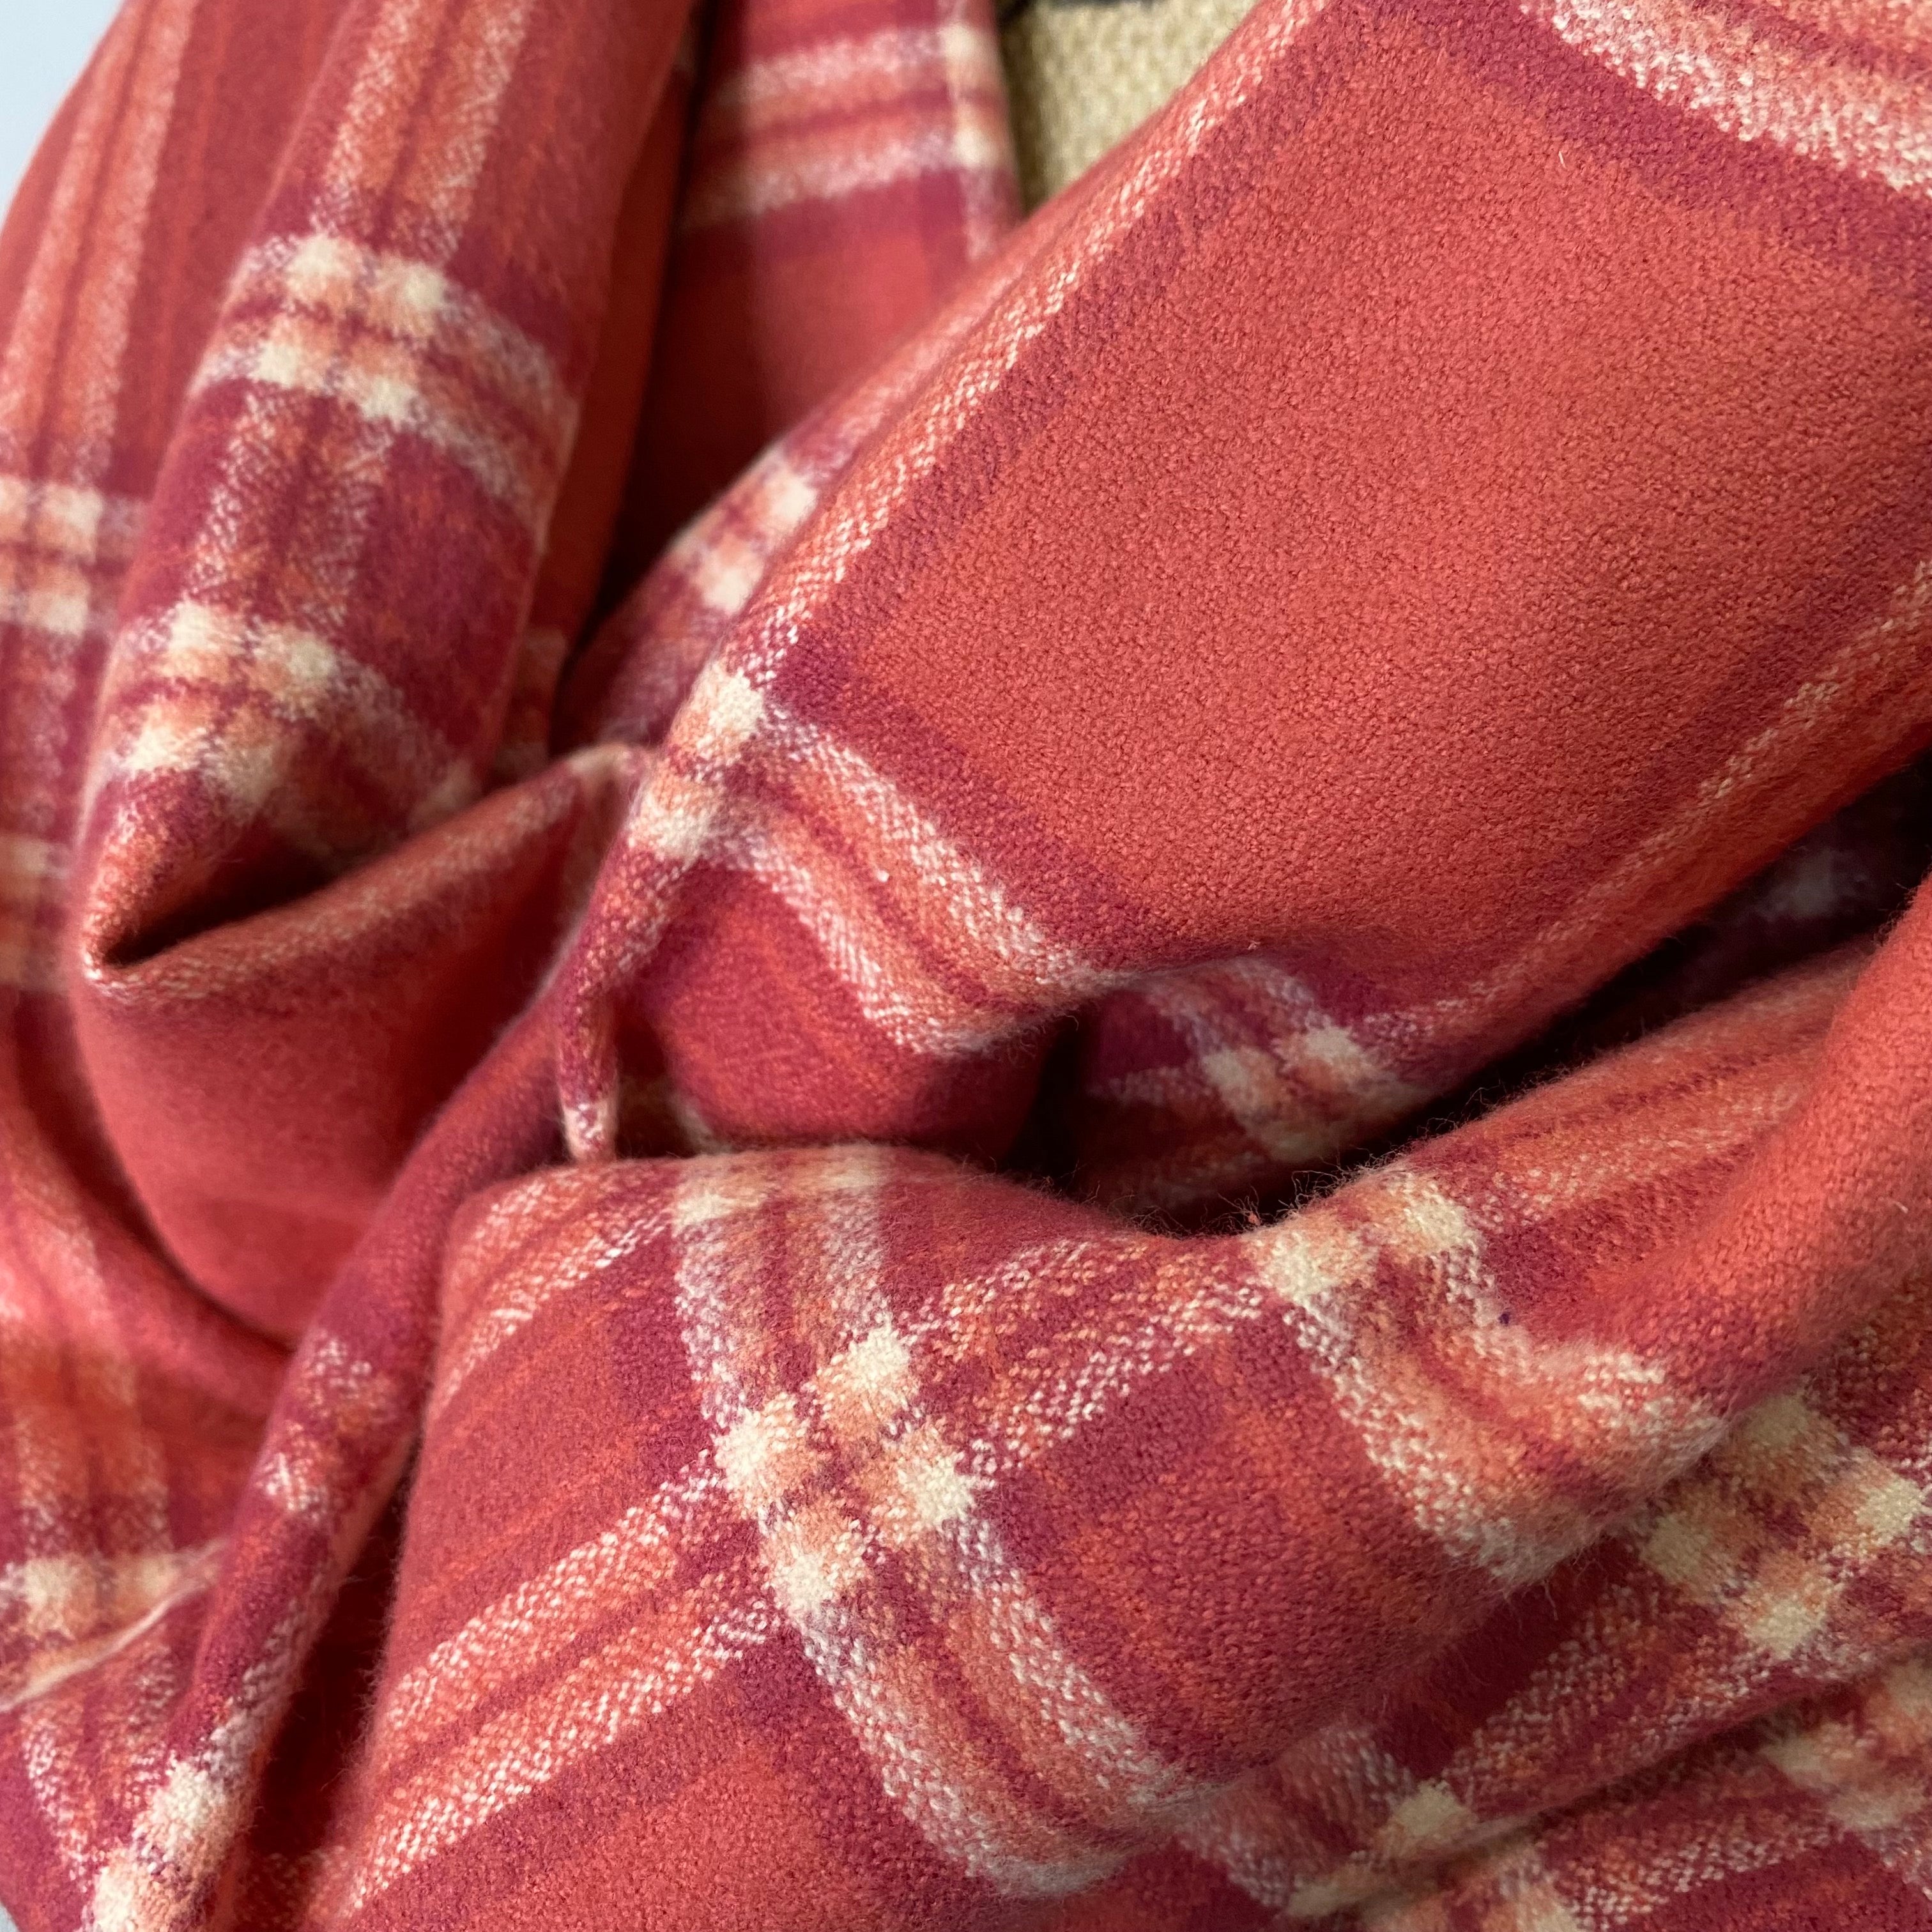 100% Organic Cotton Shades of Strawberry Pink and Cream Plaid Infinity and Blanket Scarves